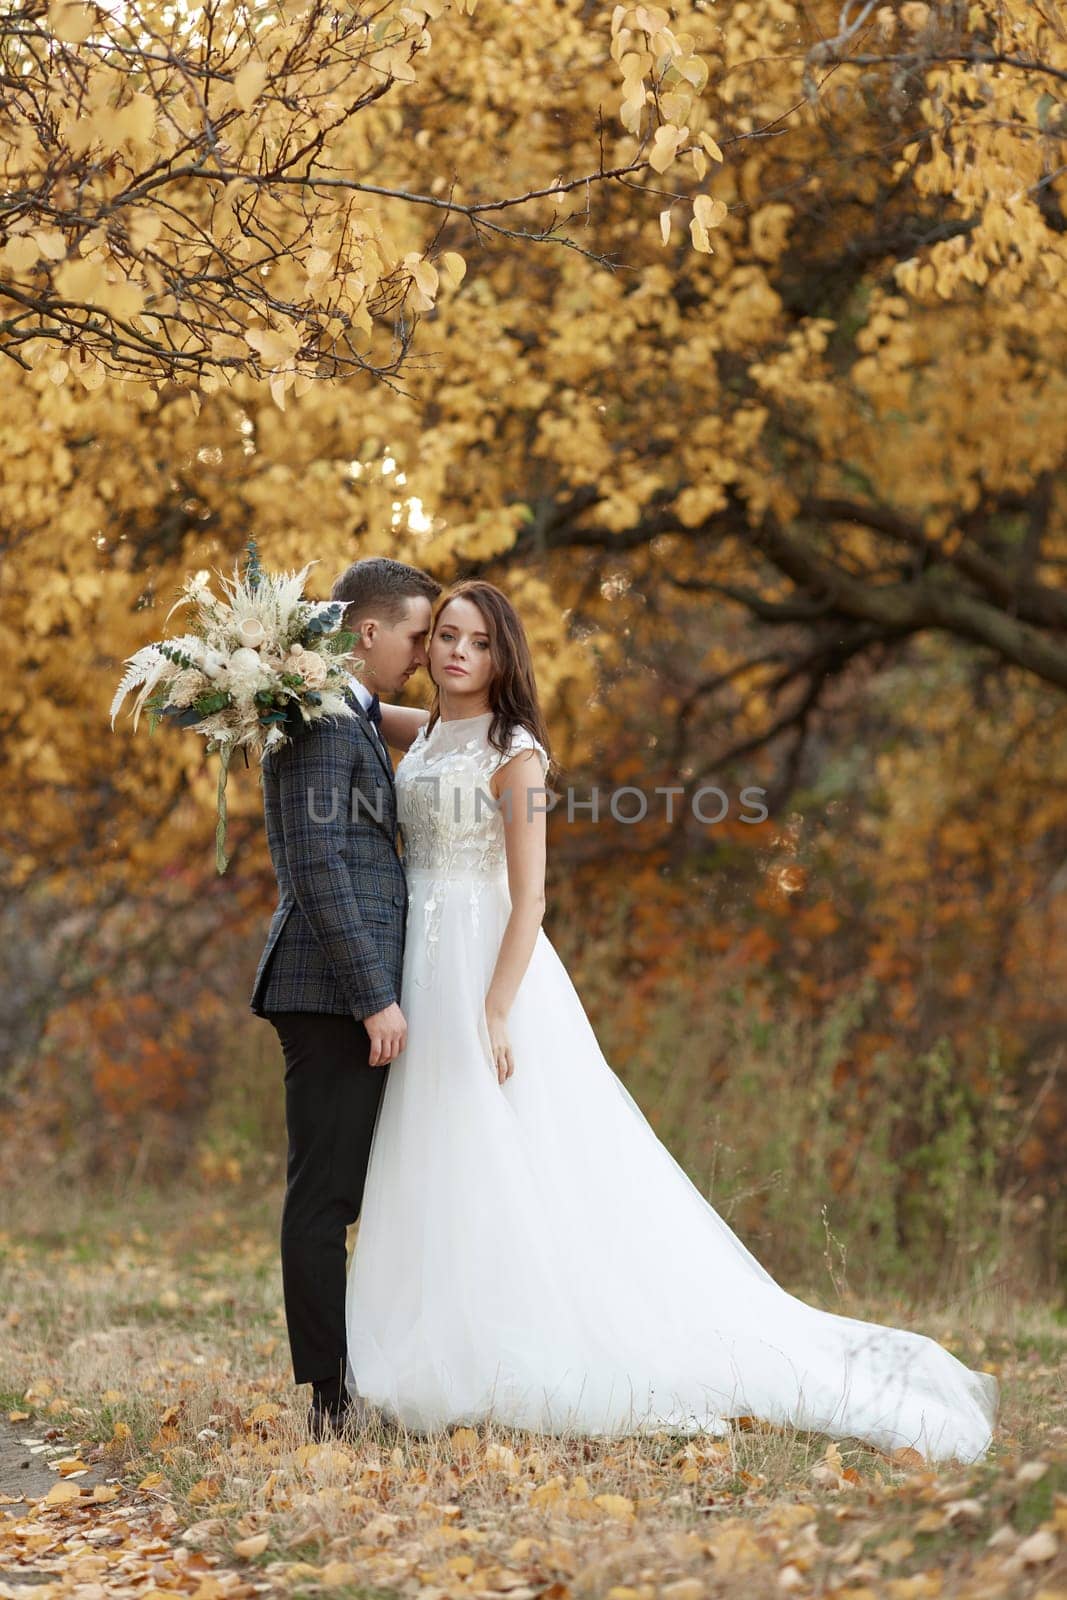 wedding couple together standing outdoor on natural background